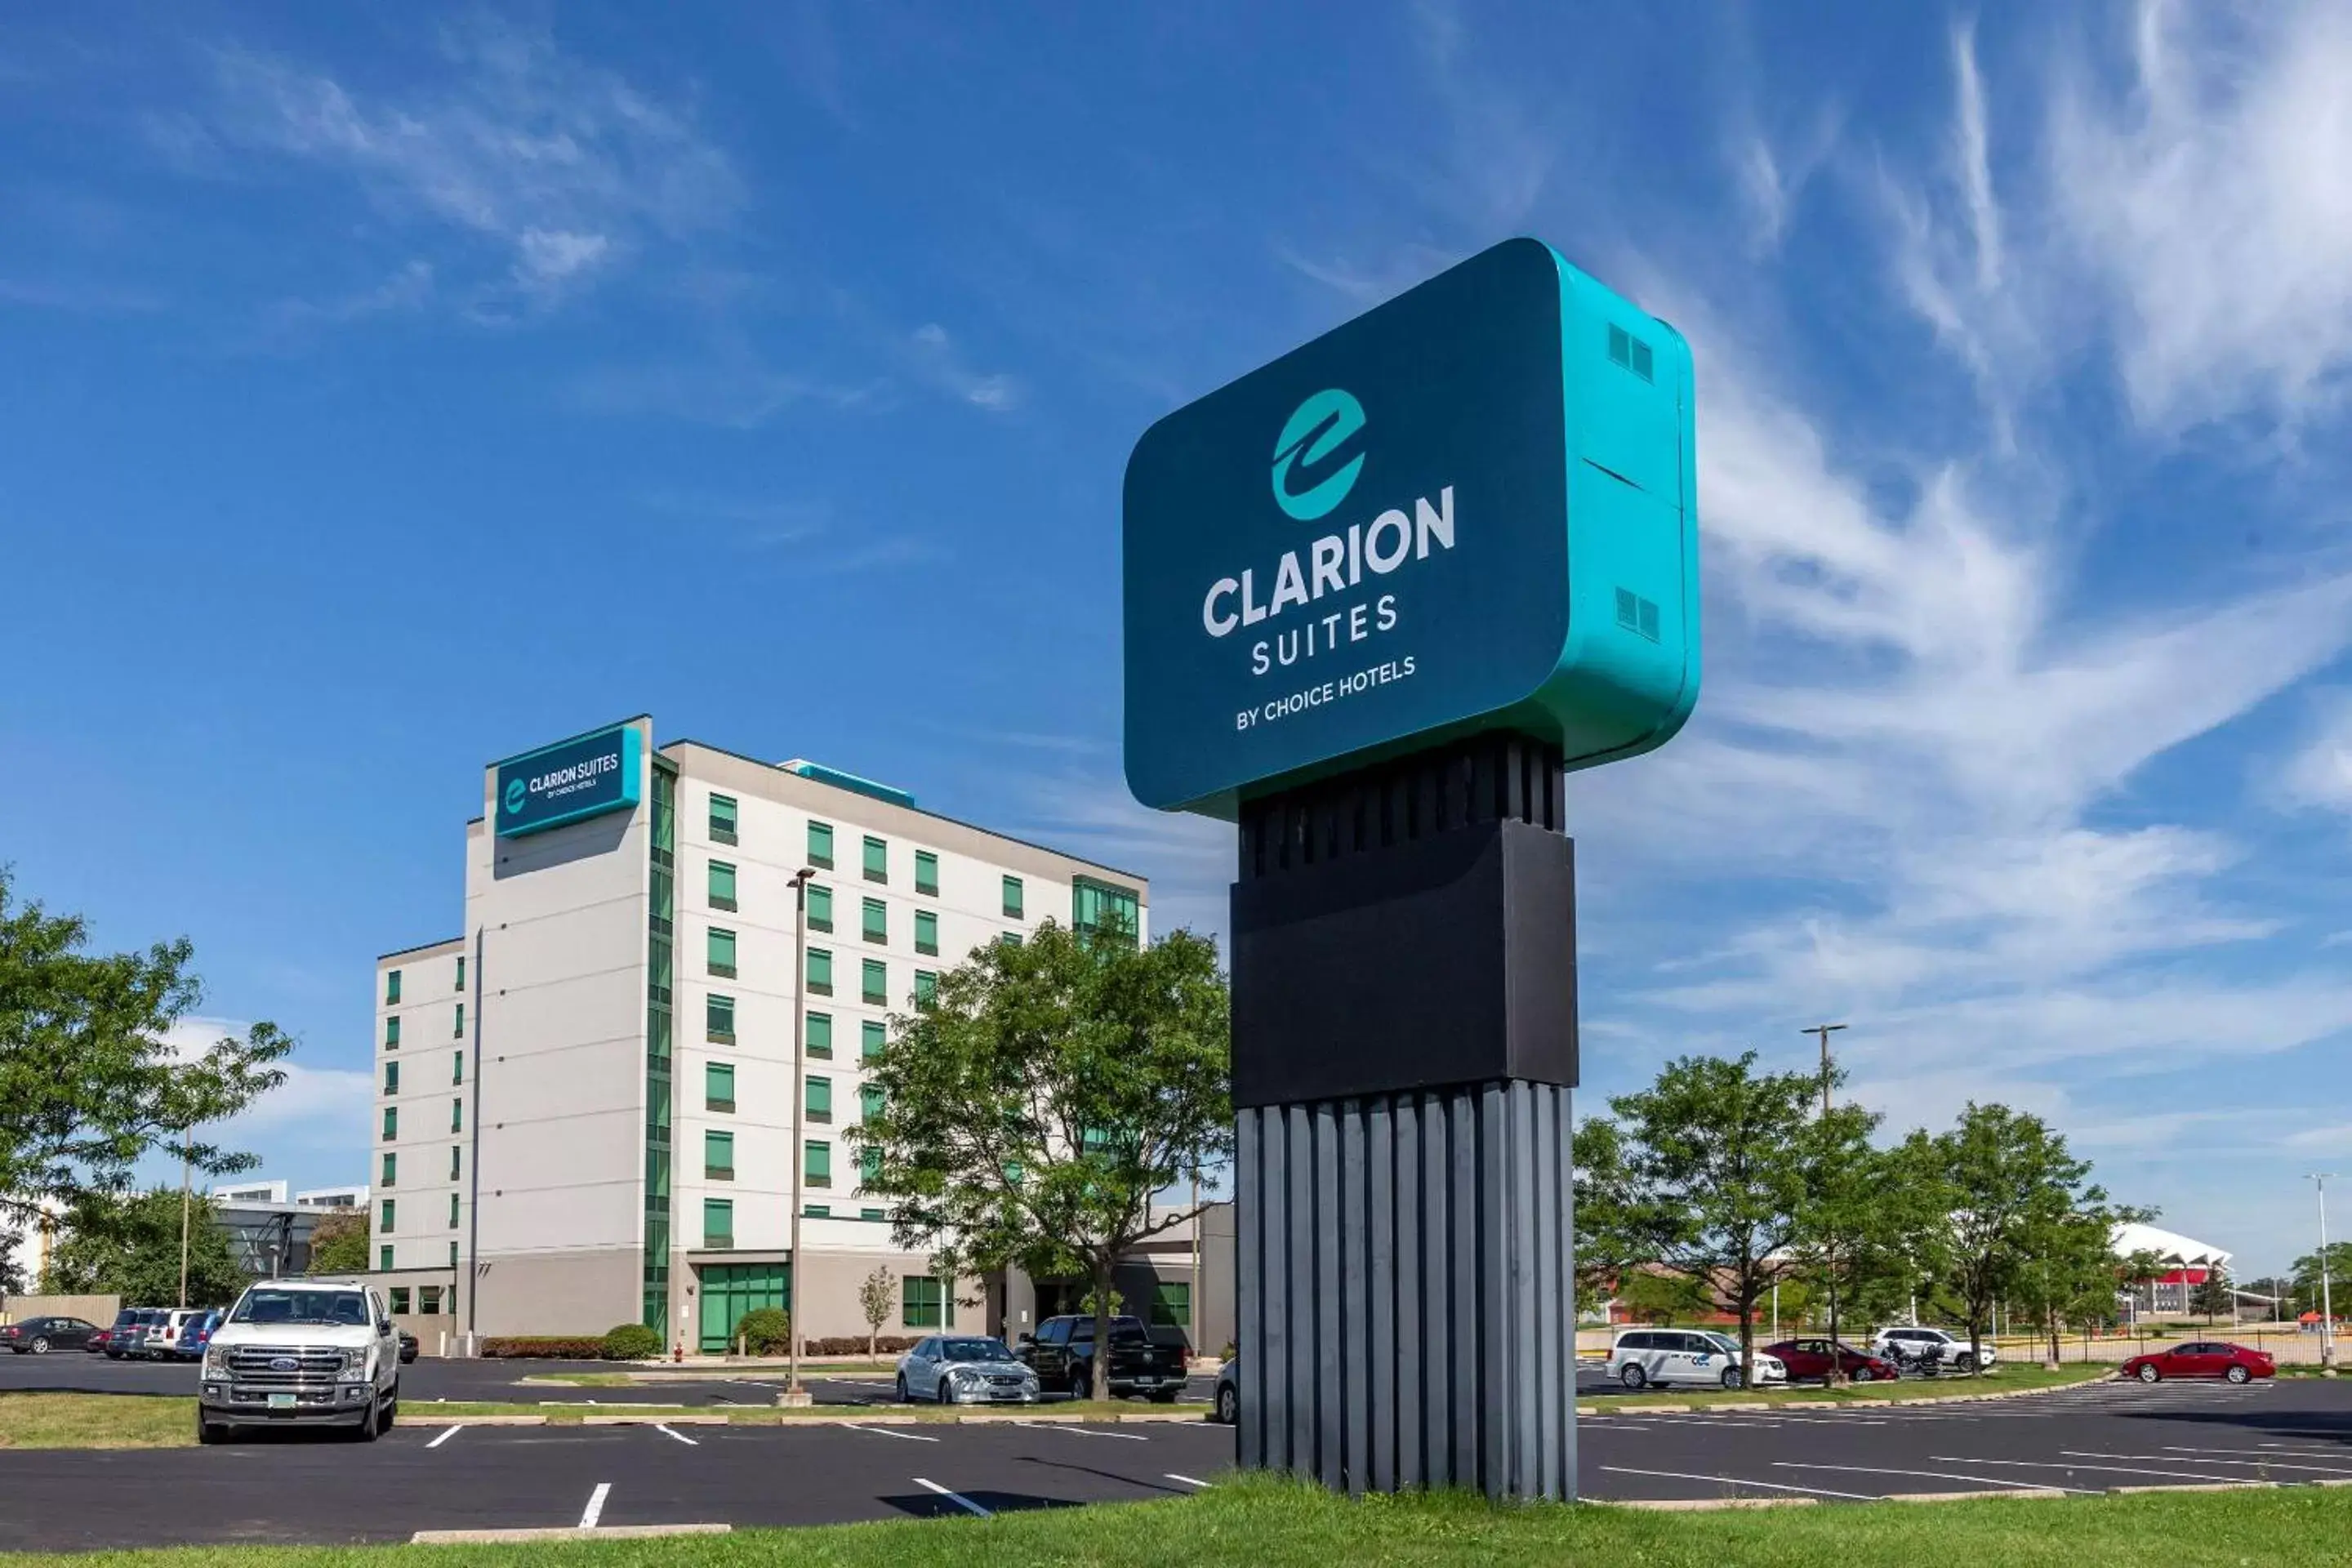 Property Building in Clarion Suites at The Alliant Energy Center